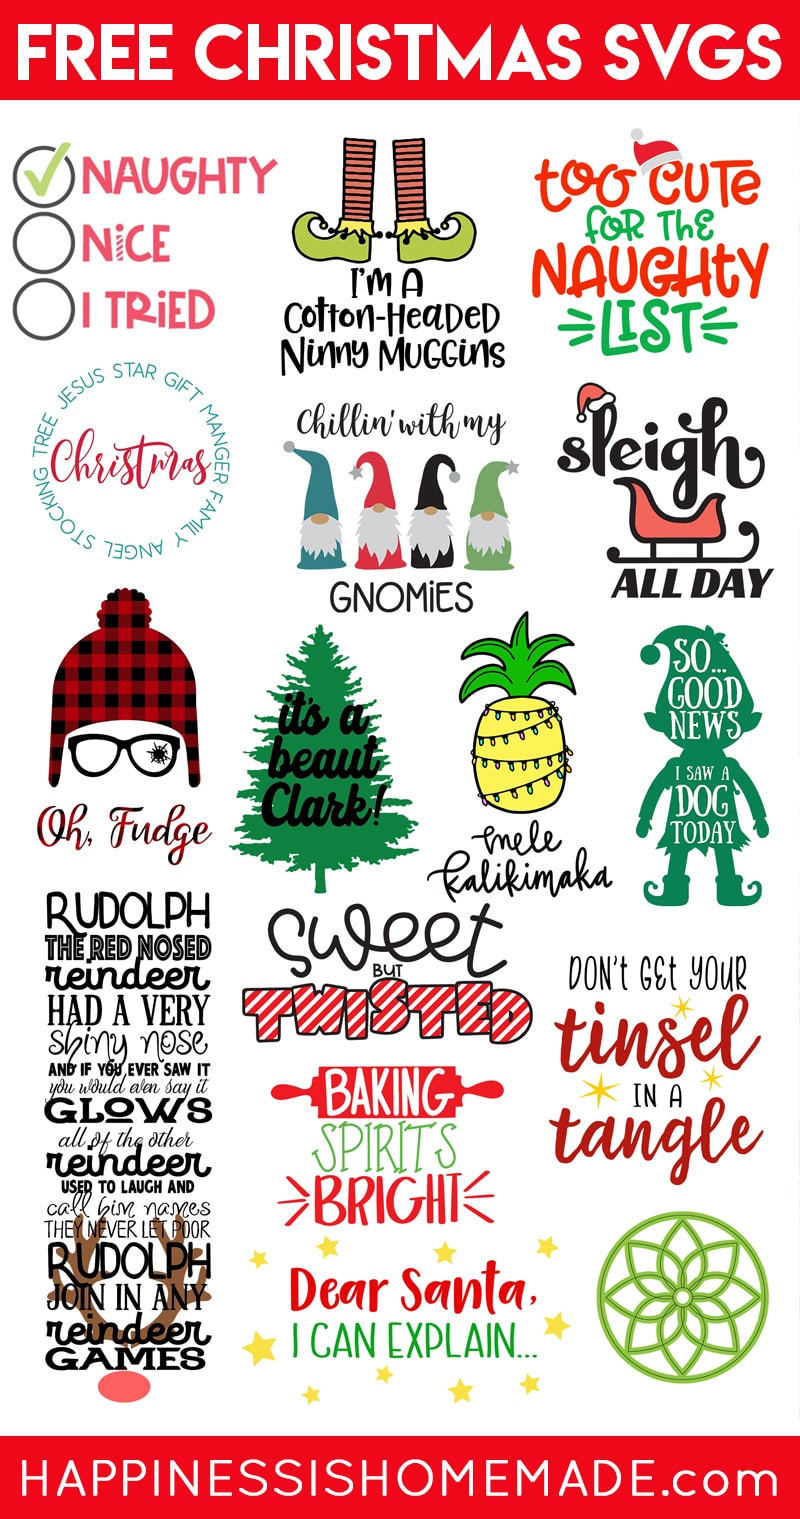 Download Free Christmas SVG Files - Happiness is Homemade